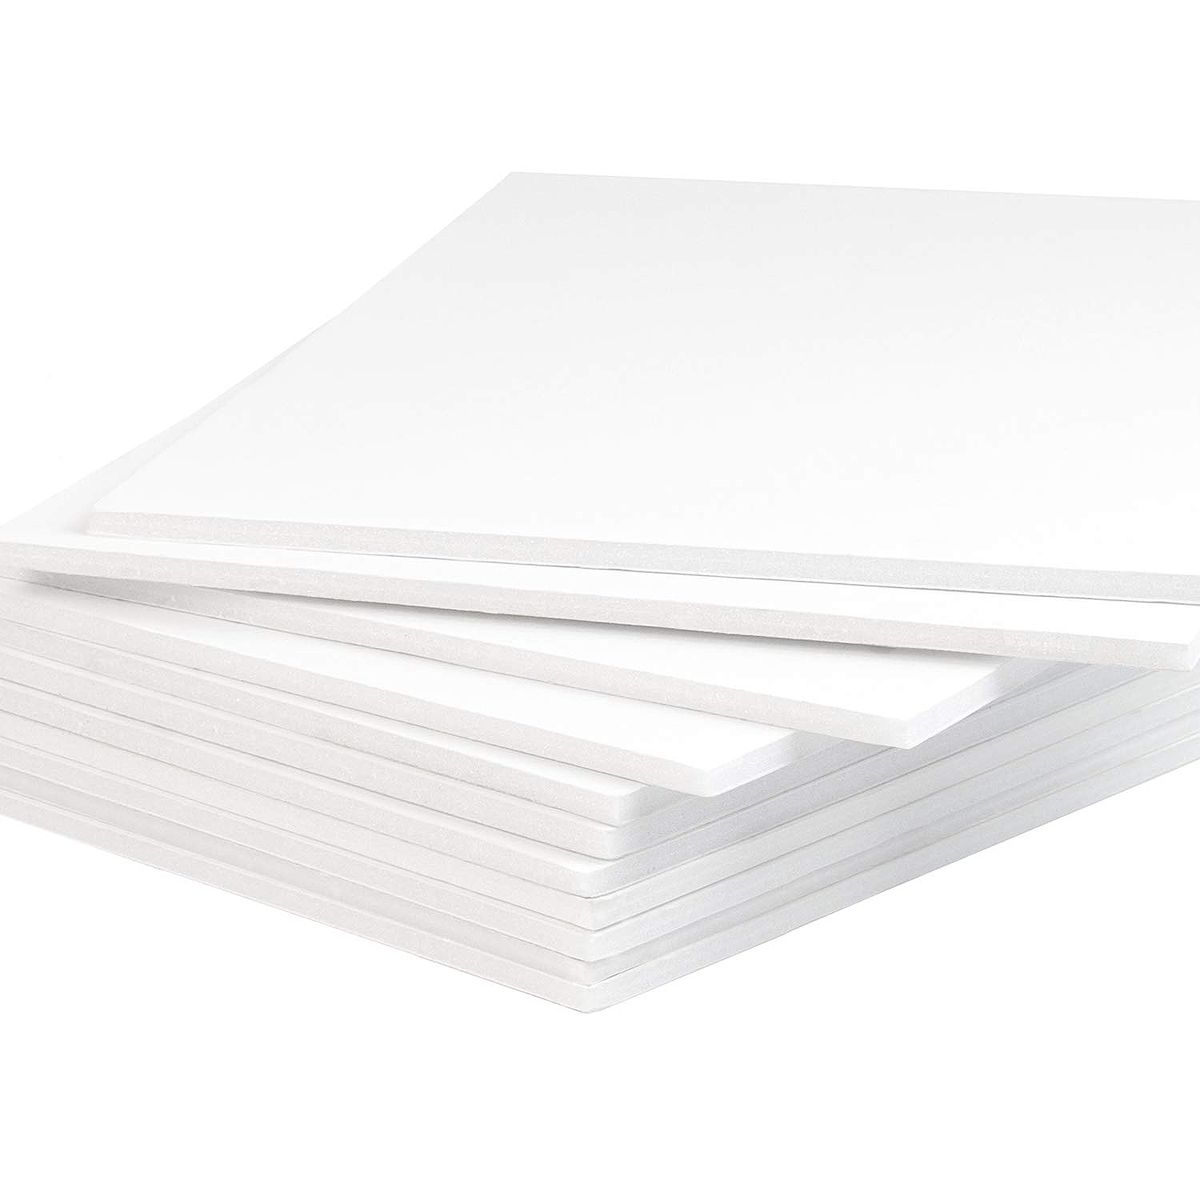 Combo packs have 1/8" sheets of Viewpoint Acid-Free Foam Backing Boards